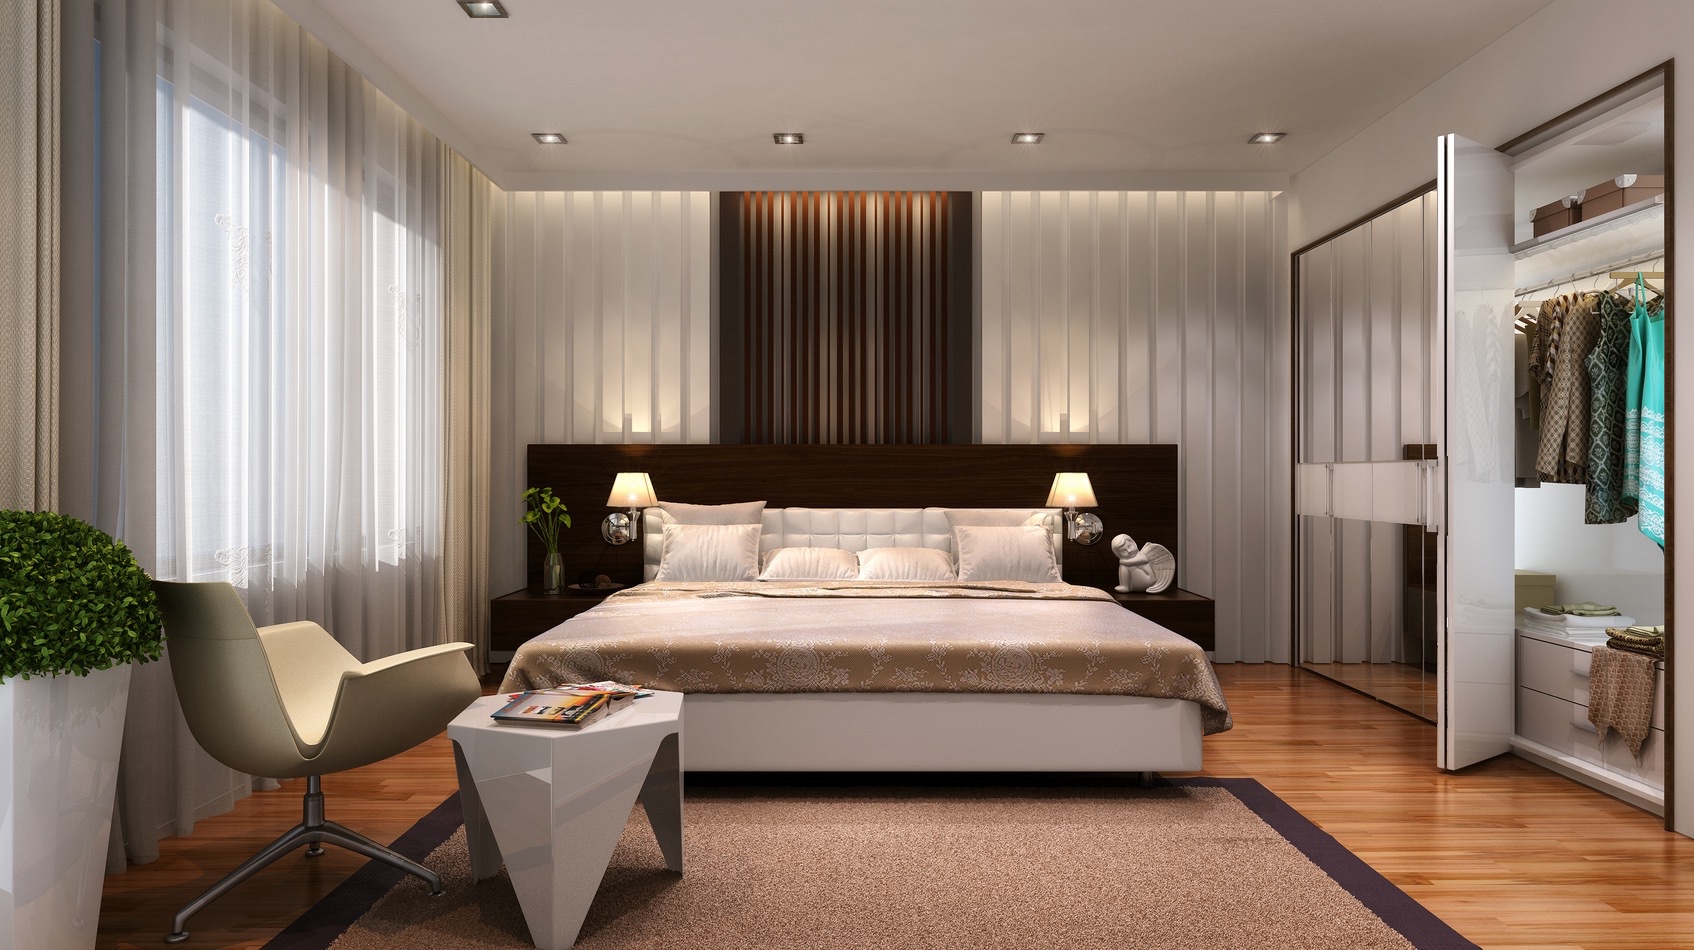 simple cool clean bedroom bedrooms designs inspiration stripes designing modern closet unique chic lamp wooden backdrop headboard wood